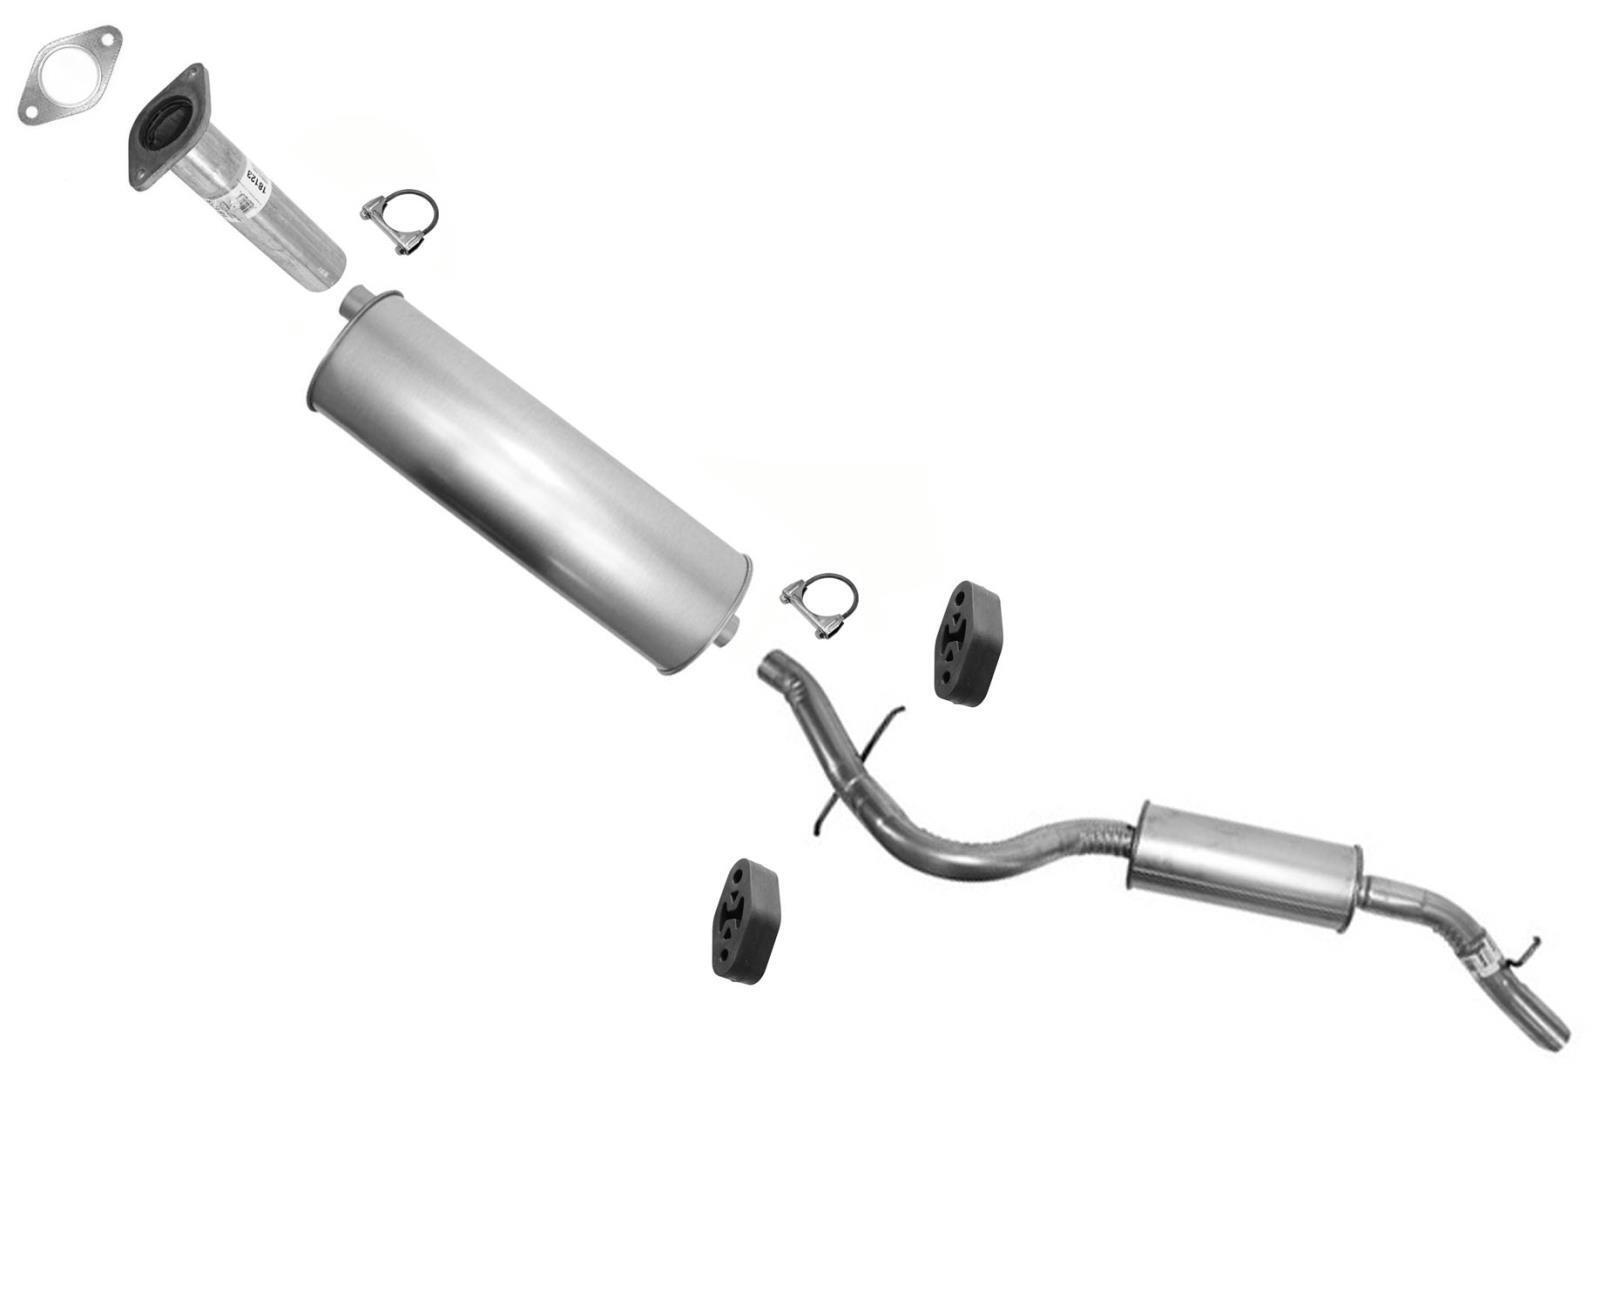 Fits For 1997-2001 Chevrolet Venture 112 Inch W/B 3.4L Muffler Exhaust System